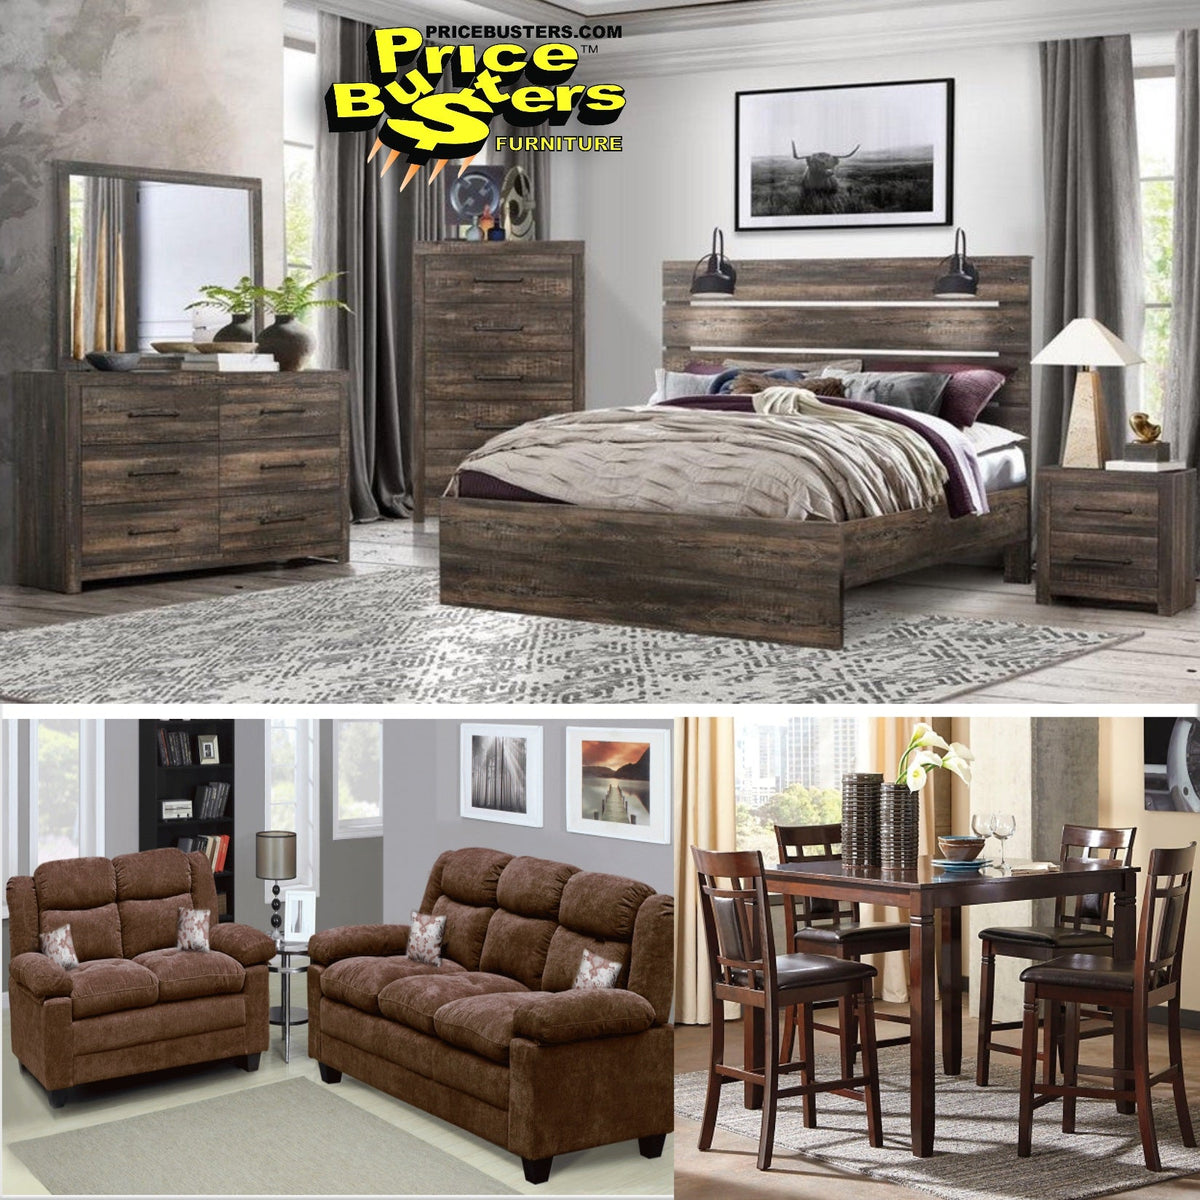 Explore Our Selection of Top Tier Discount Furniture in Hyattsville, MD